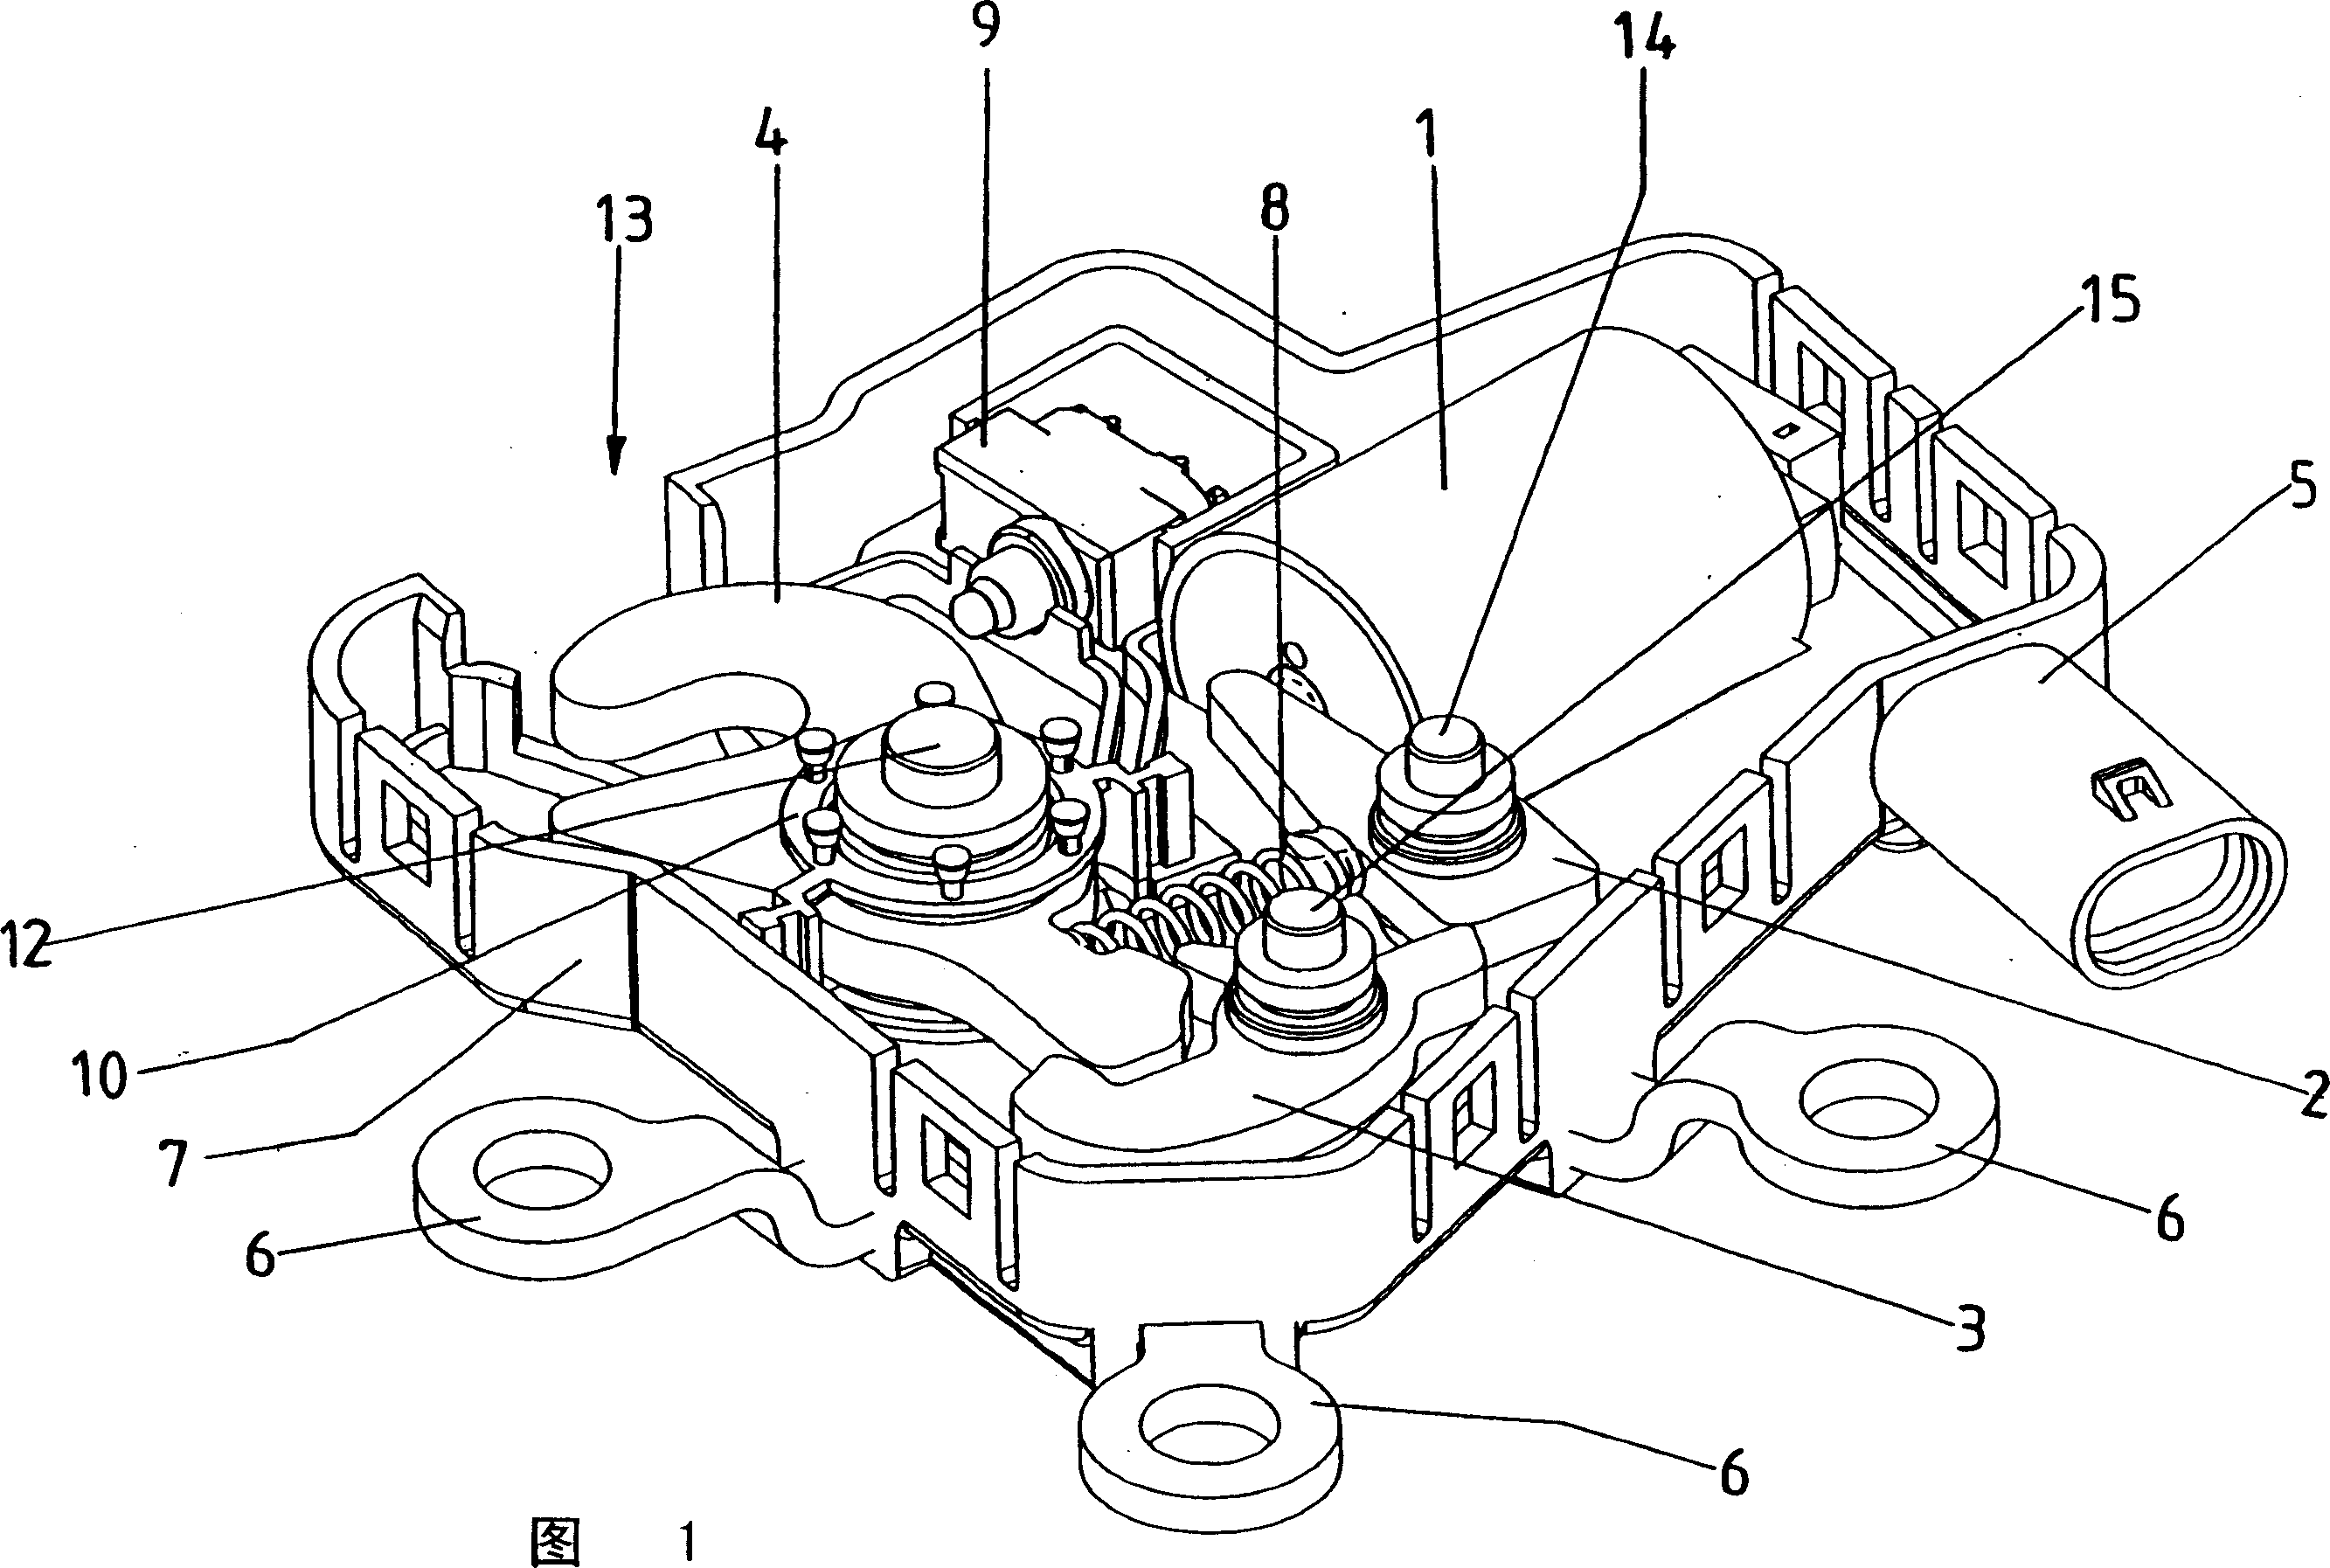 Apparatus for locking and fast unlocking of movable parts